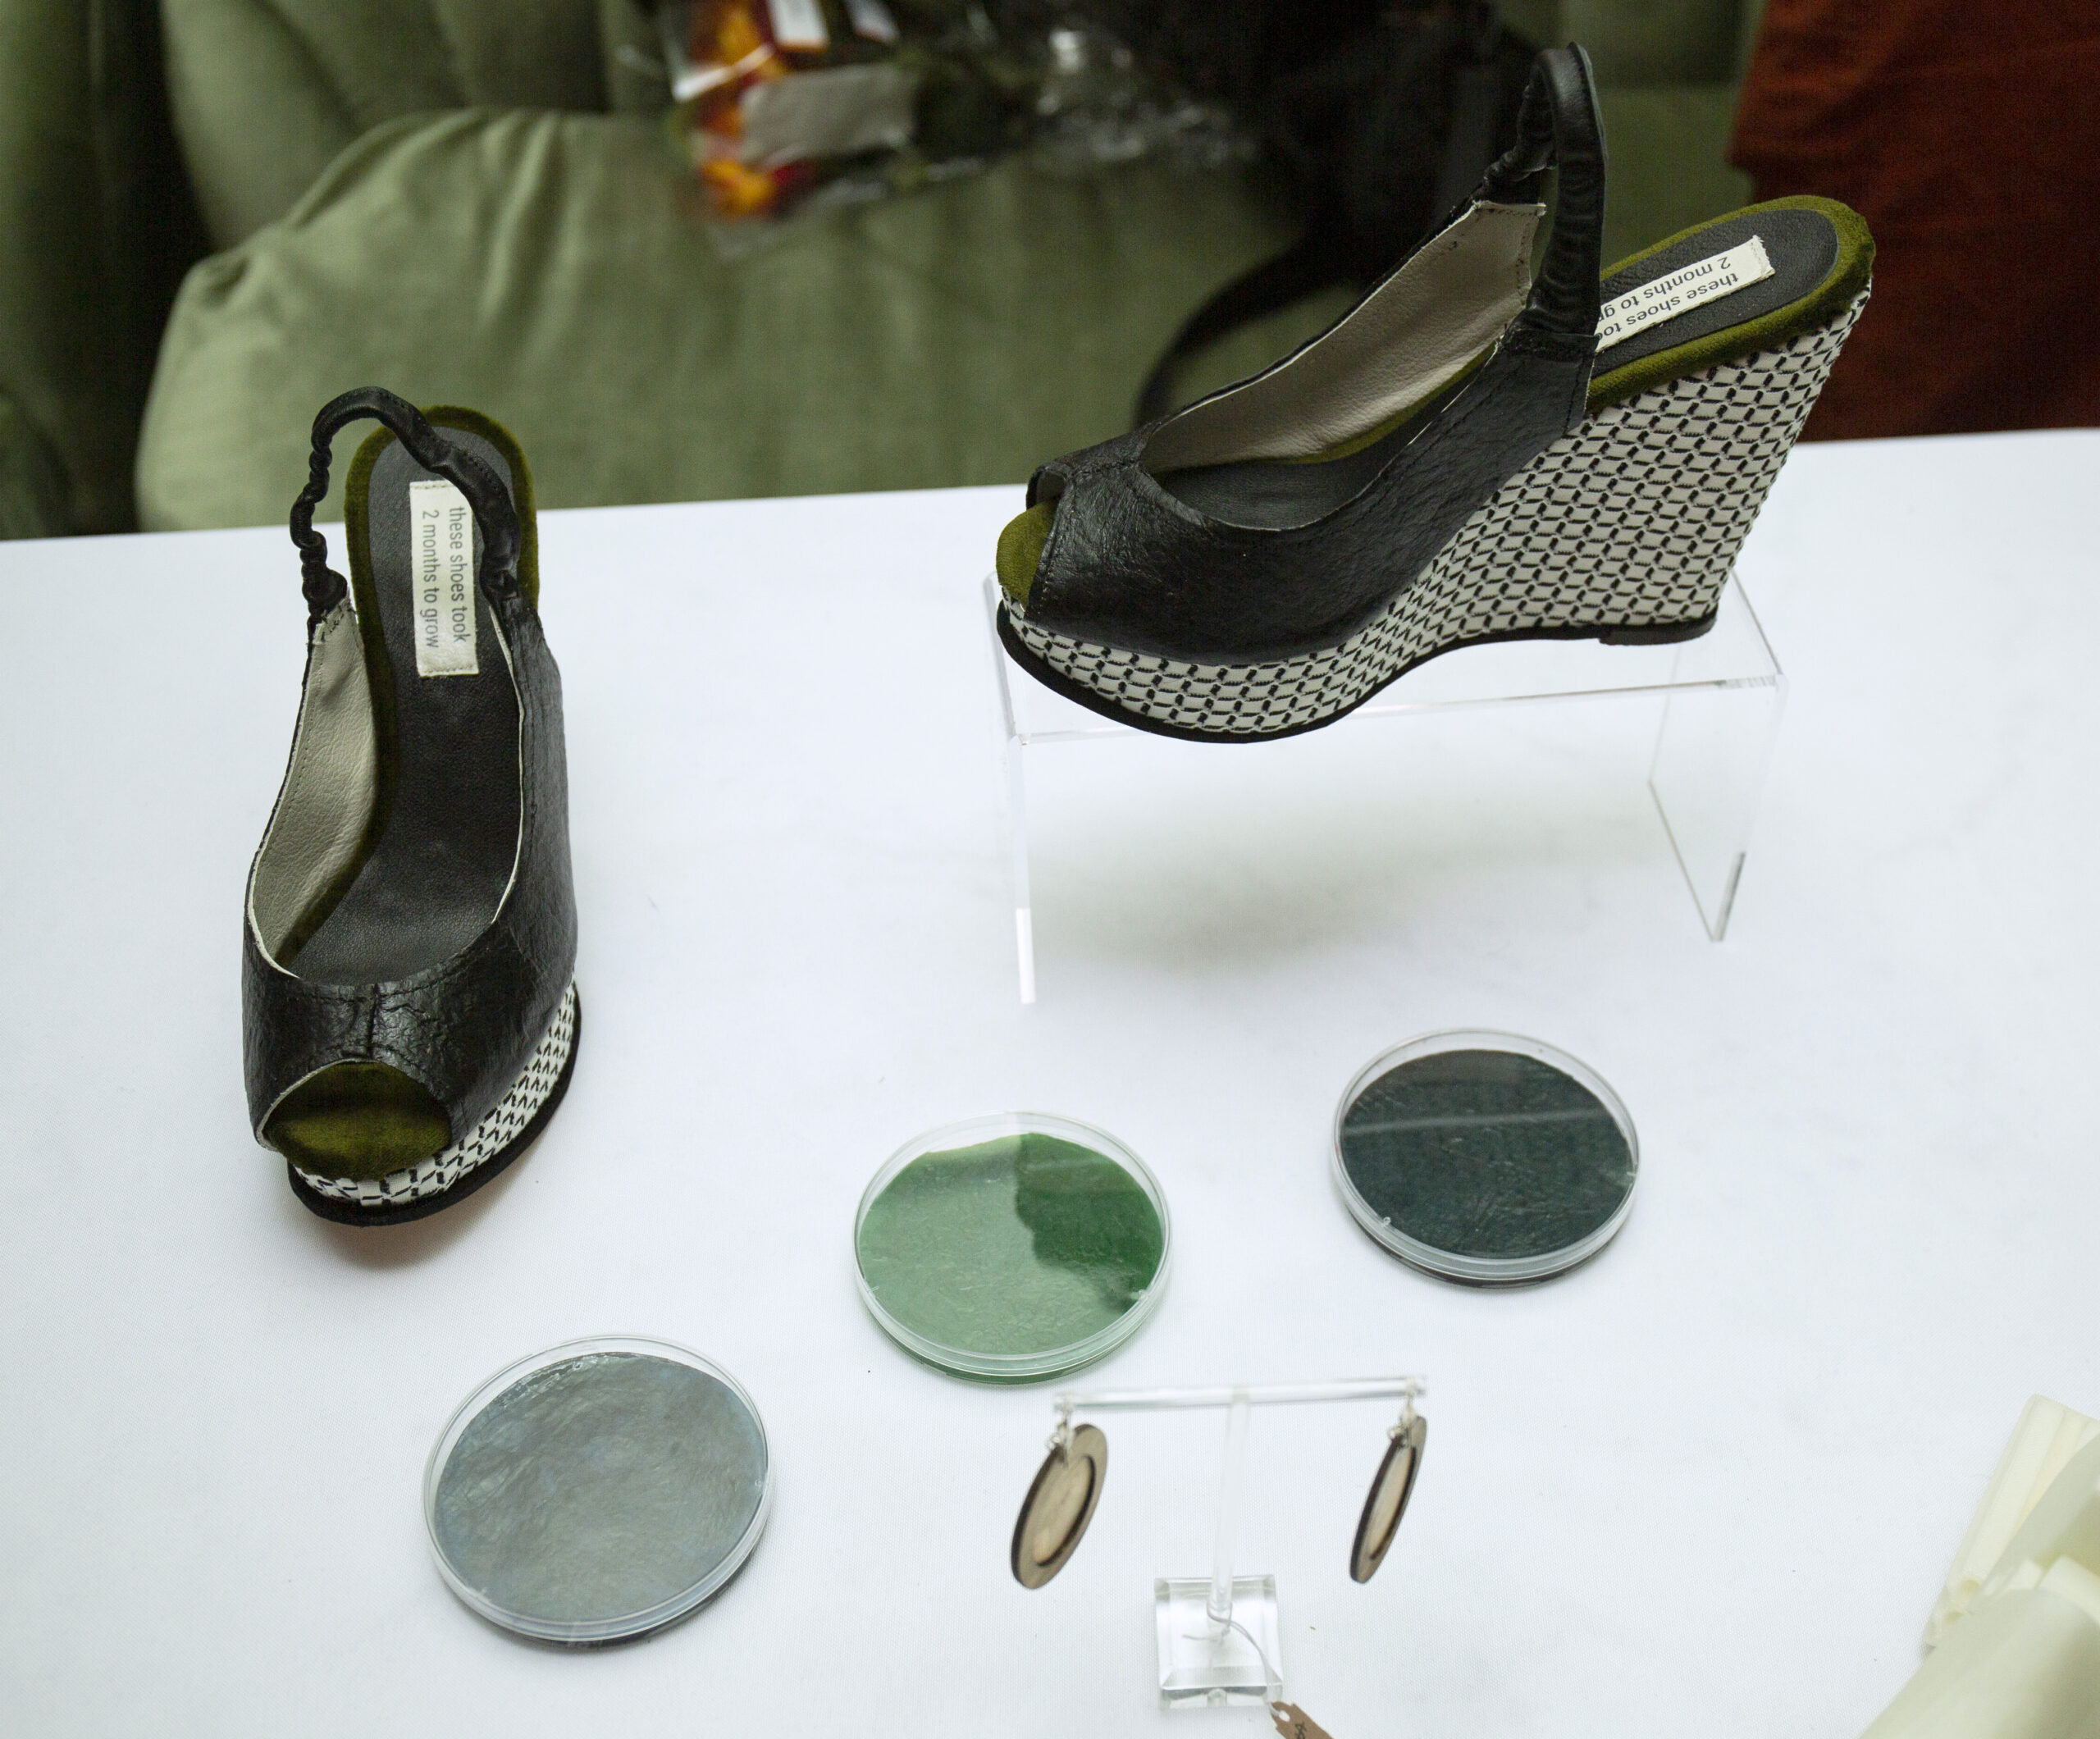 Black platform sandals arranged on a display table with three petri dishes full of green material